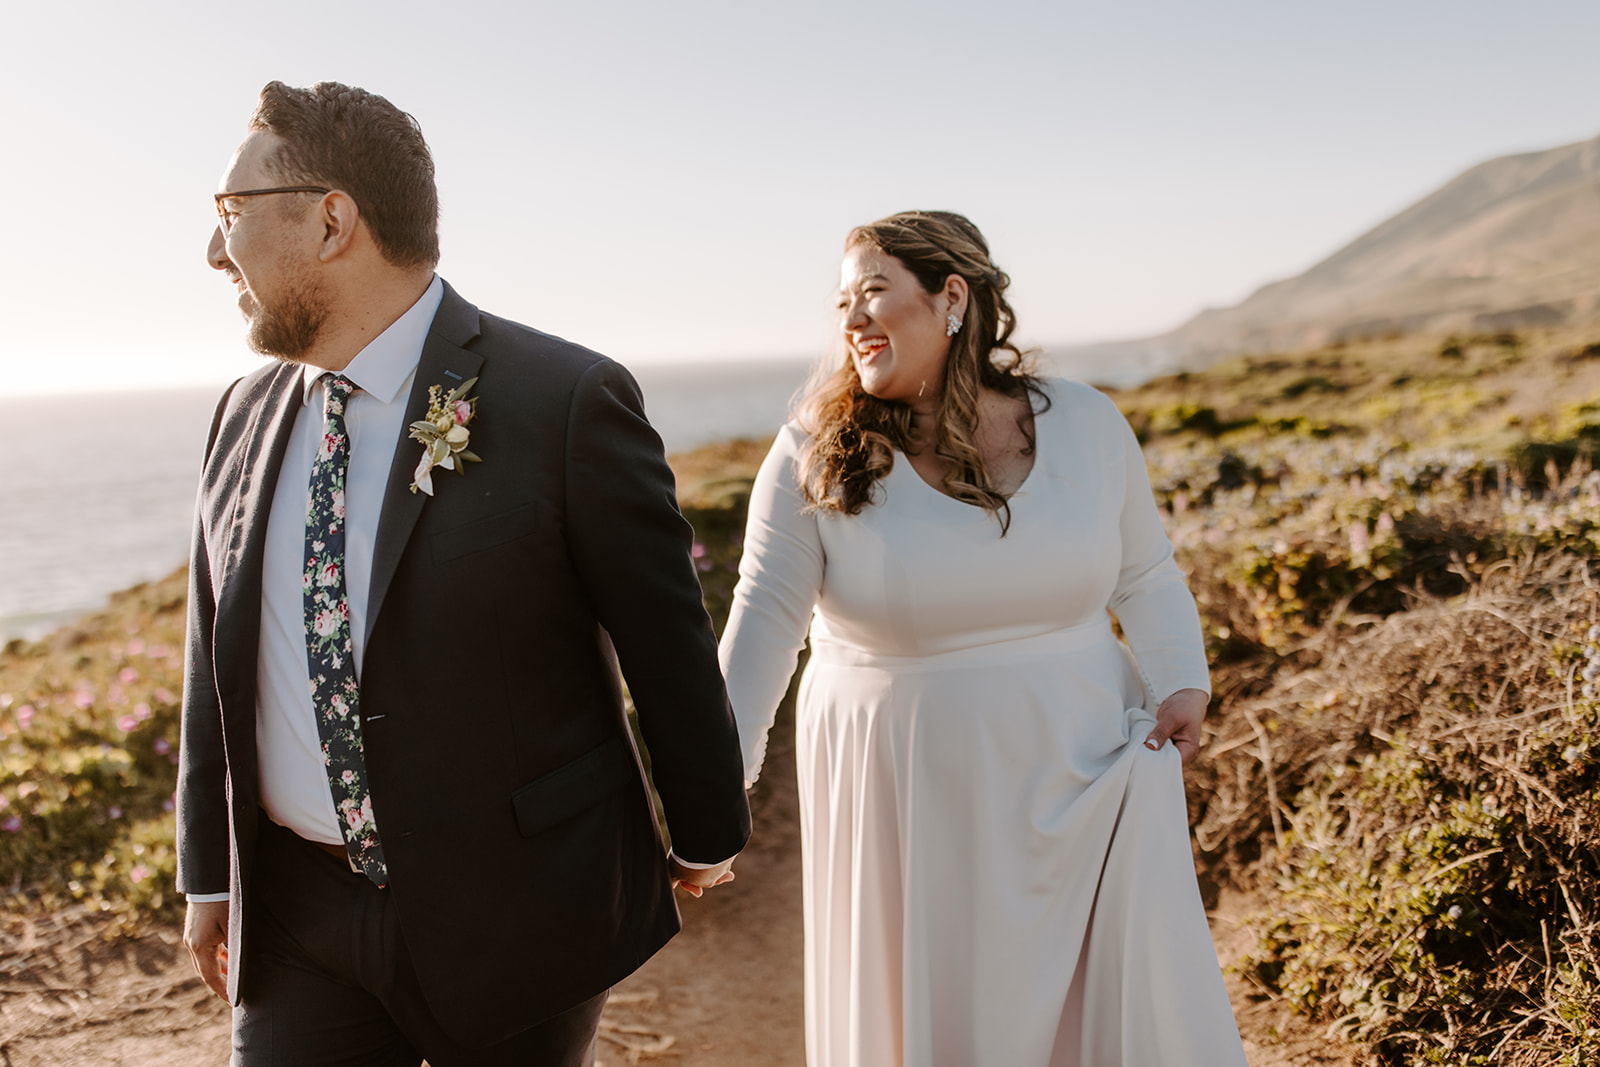 Couple who eloped in Big Sur have portraits with views of coast